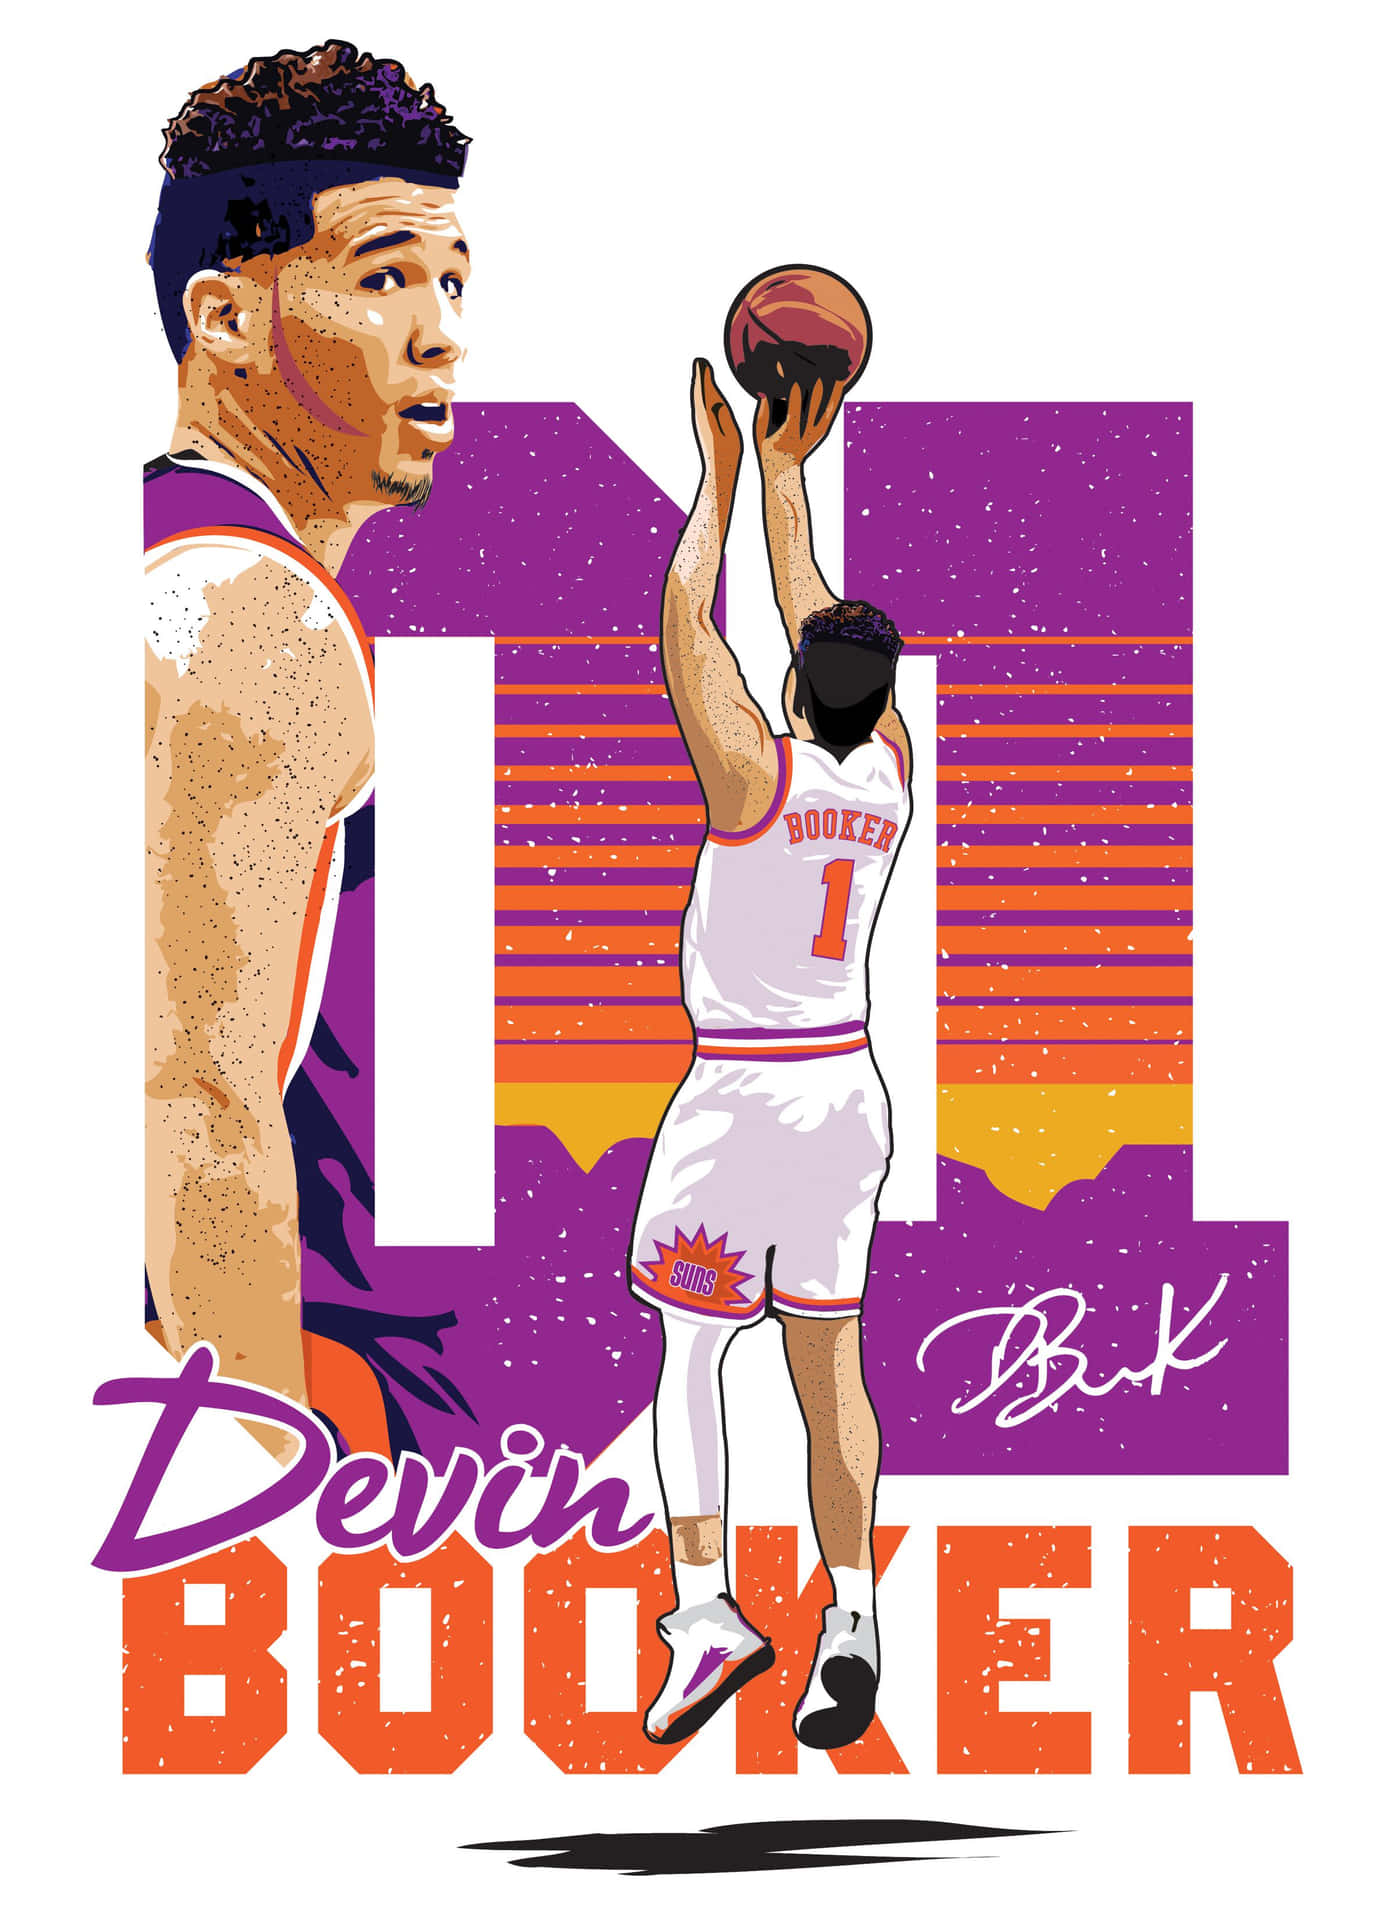 Phoenix Suns' Devin Booker shows off his new iPhone Wallpaper